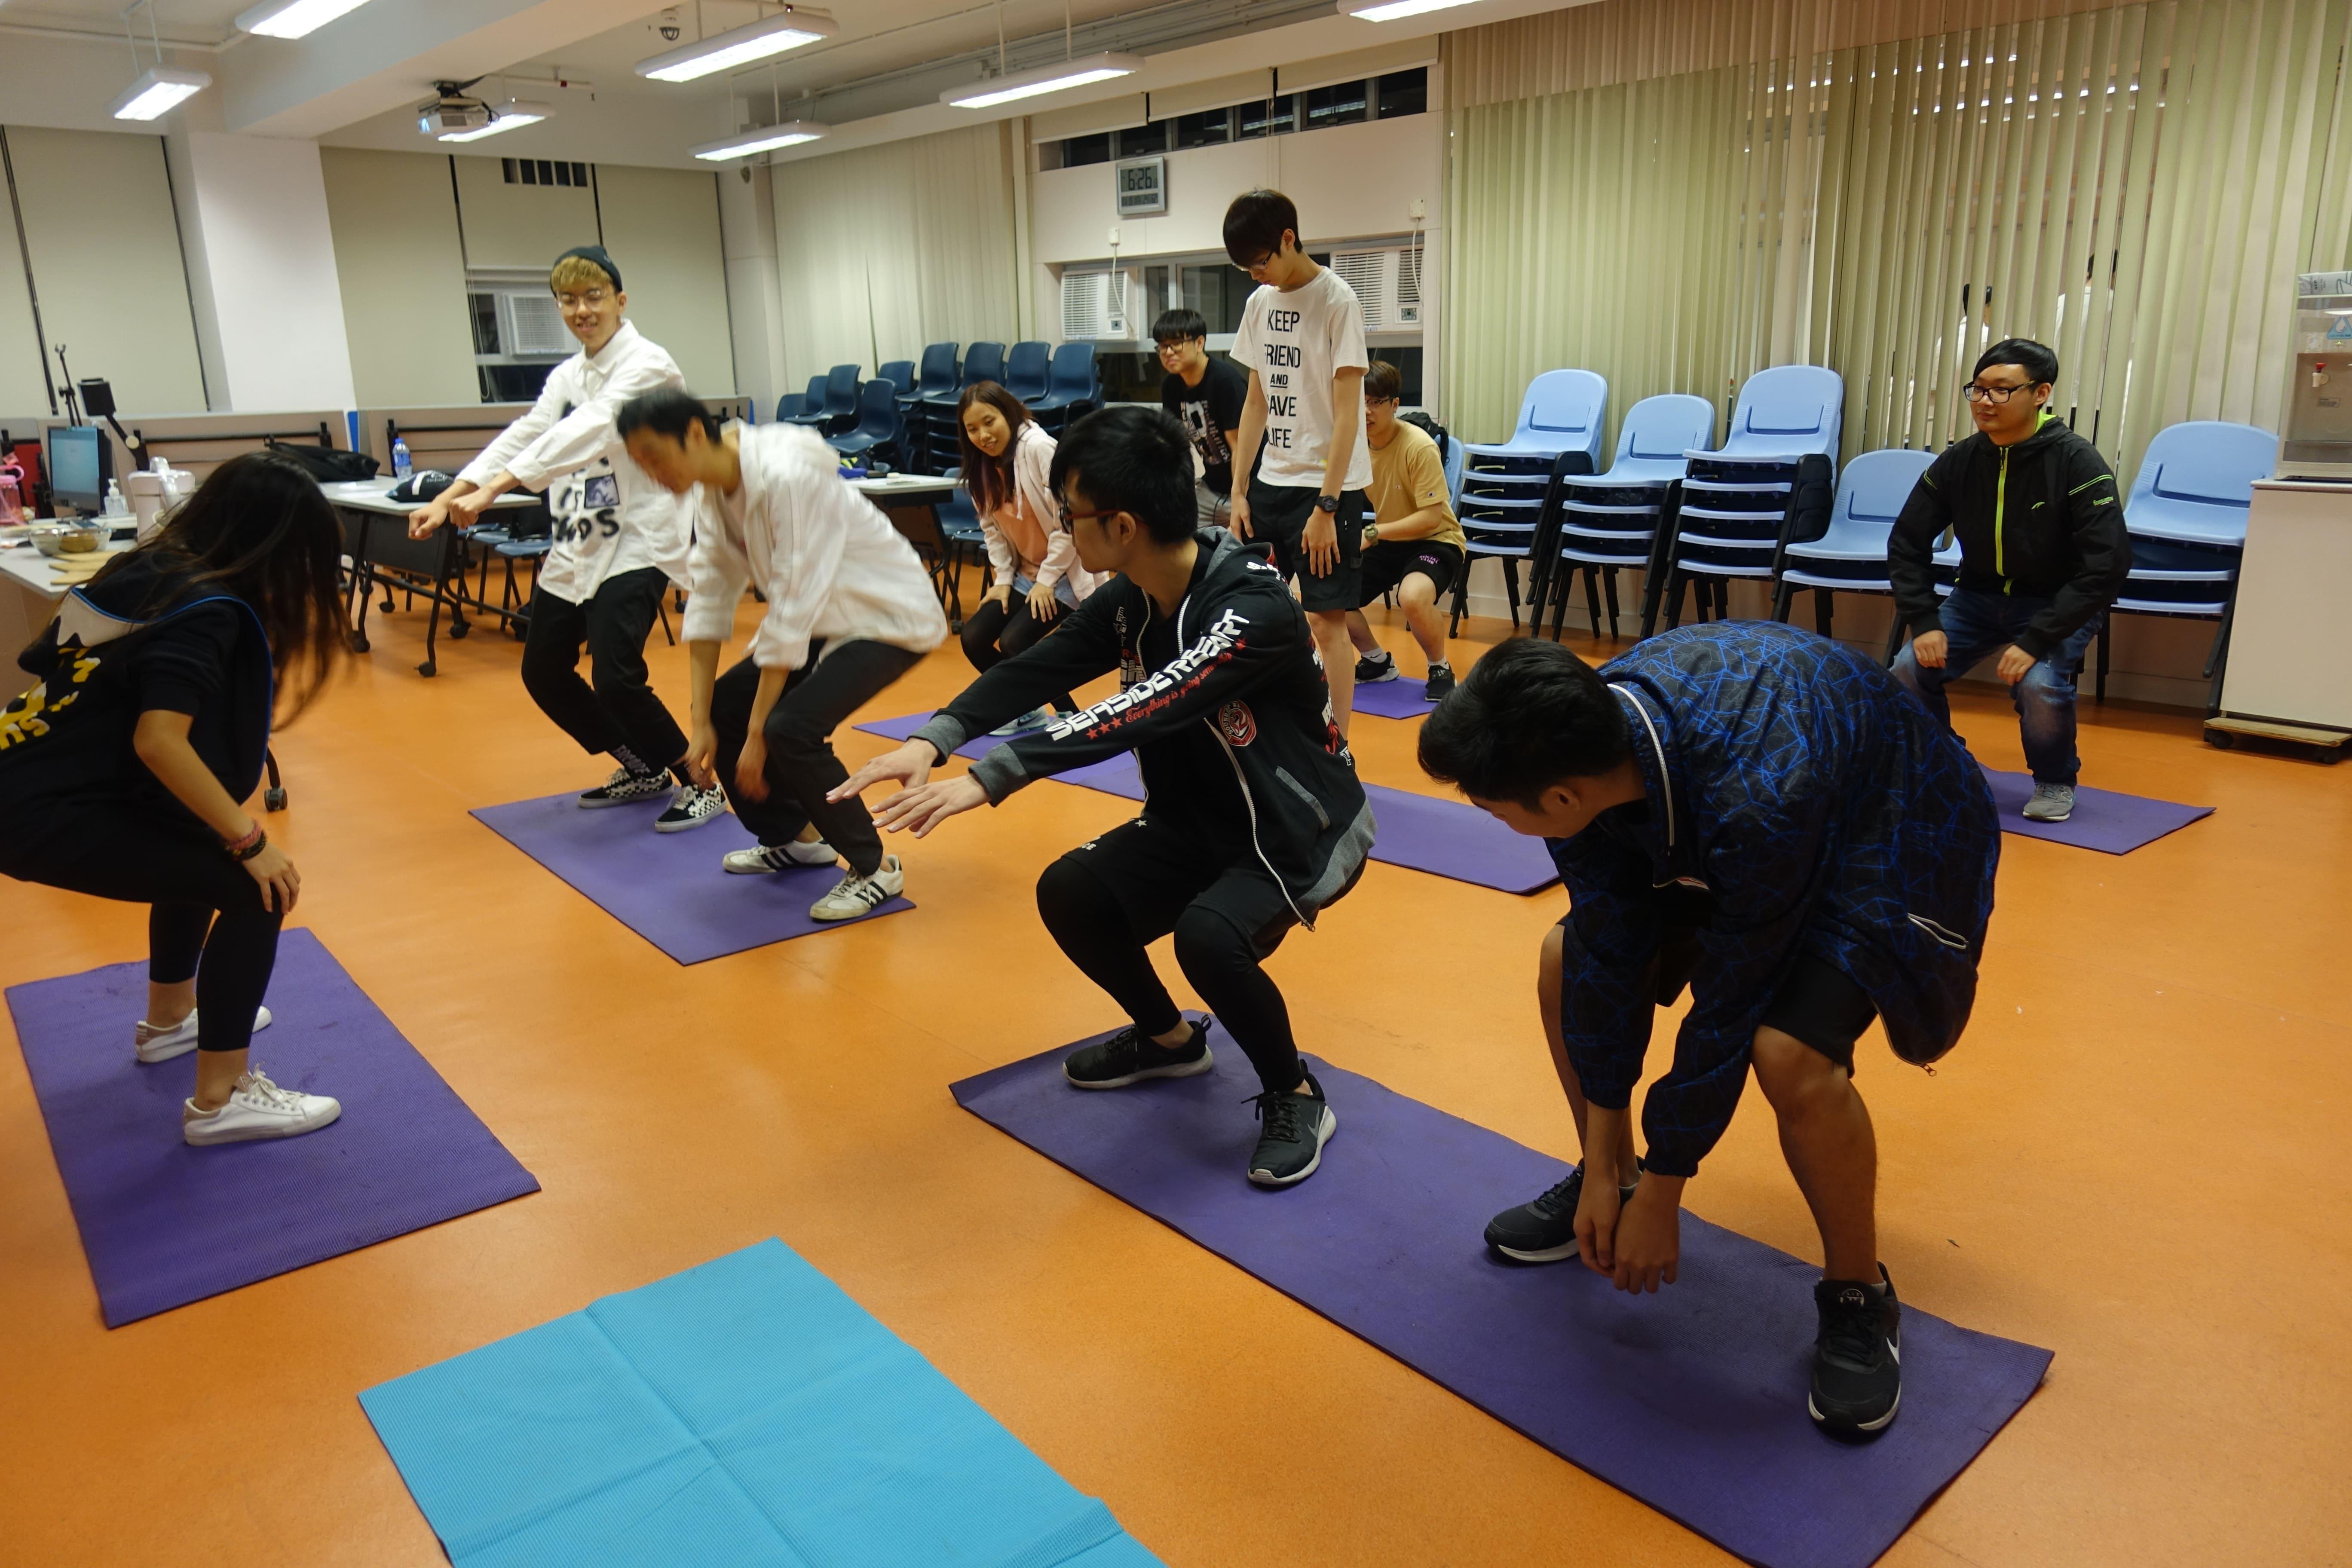 Students were working hard on exercise 